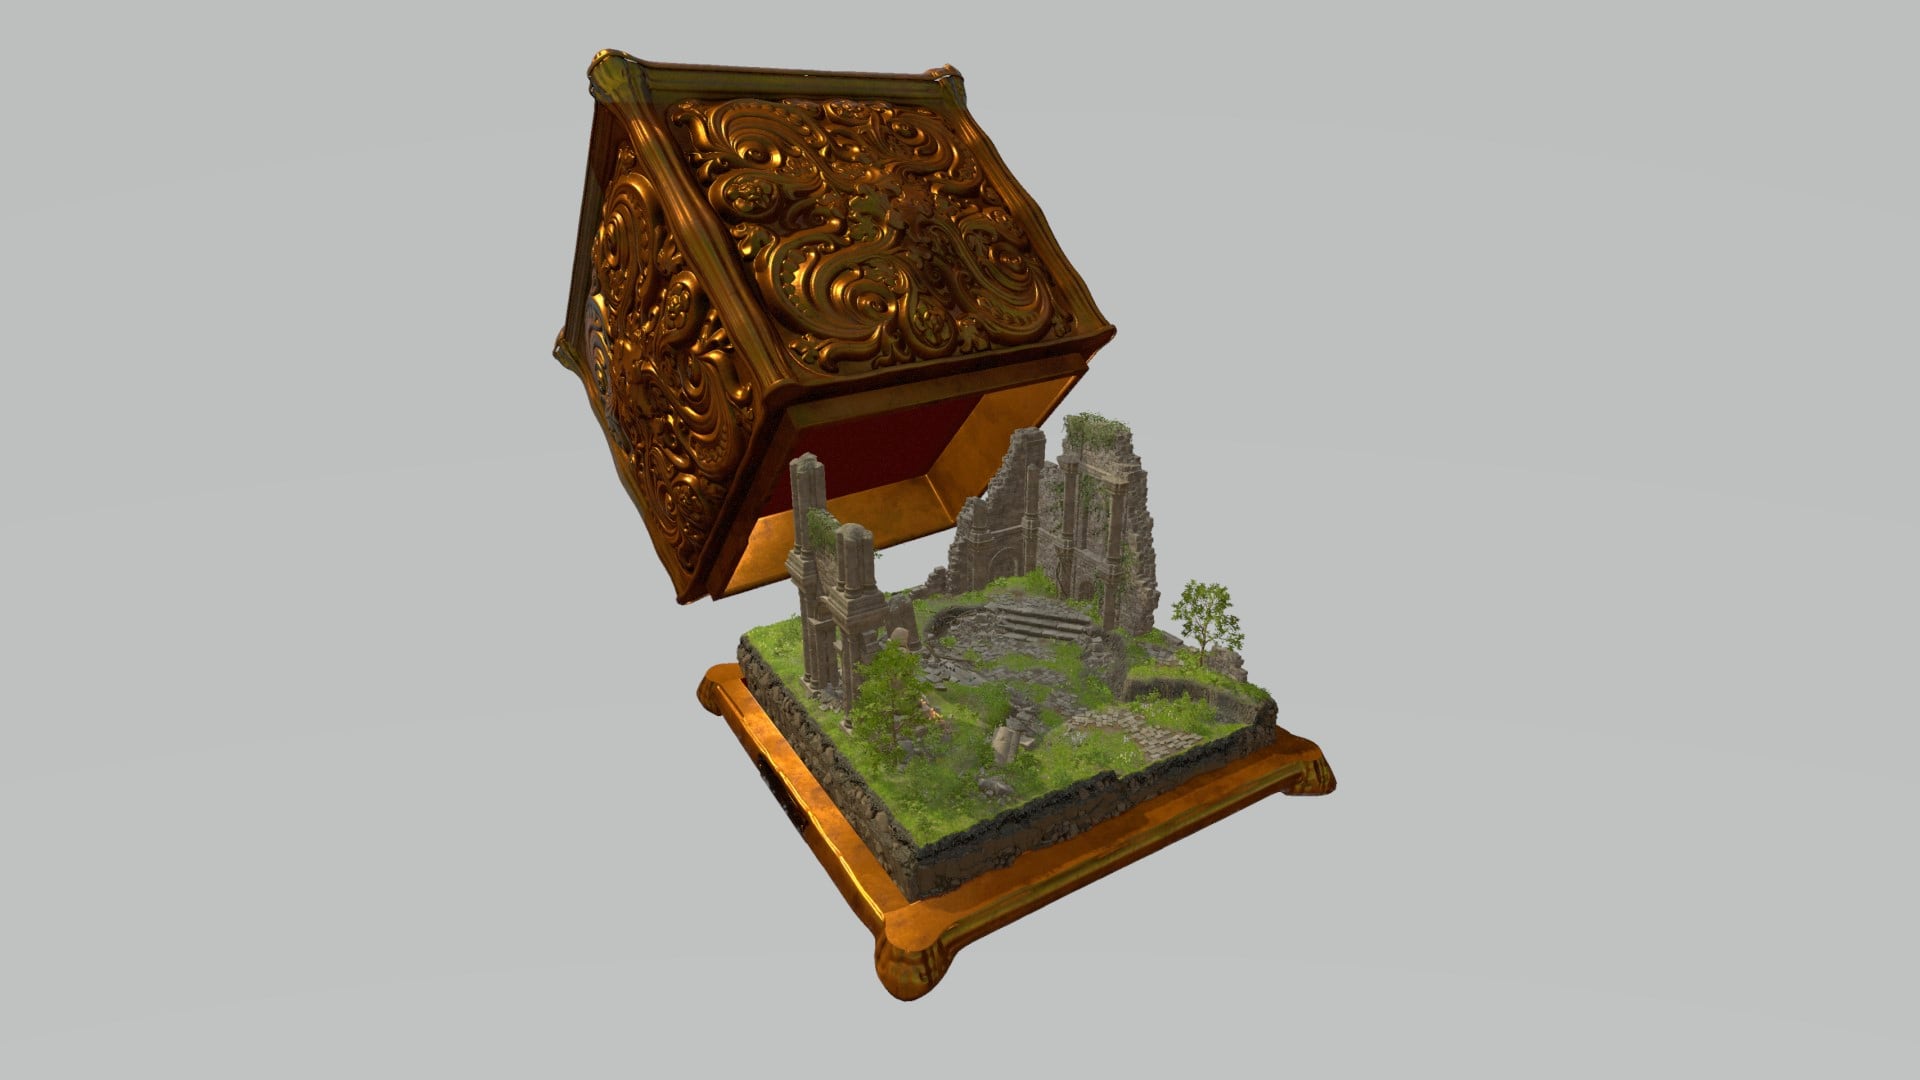 An example of the virtual land packaged in gift boxes. Source: pcgamesn.com